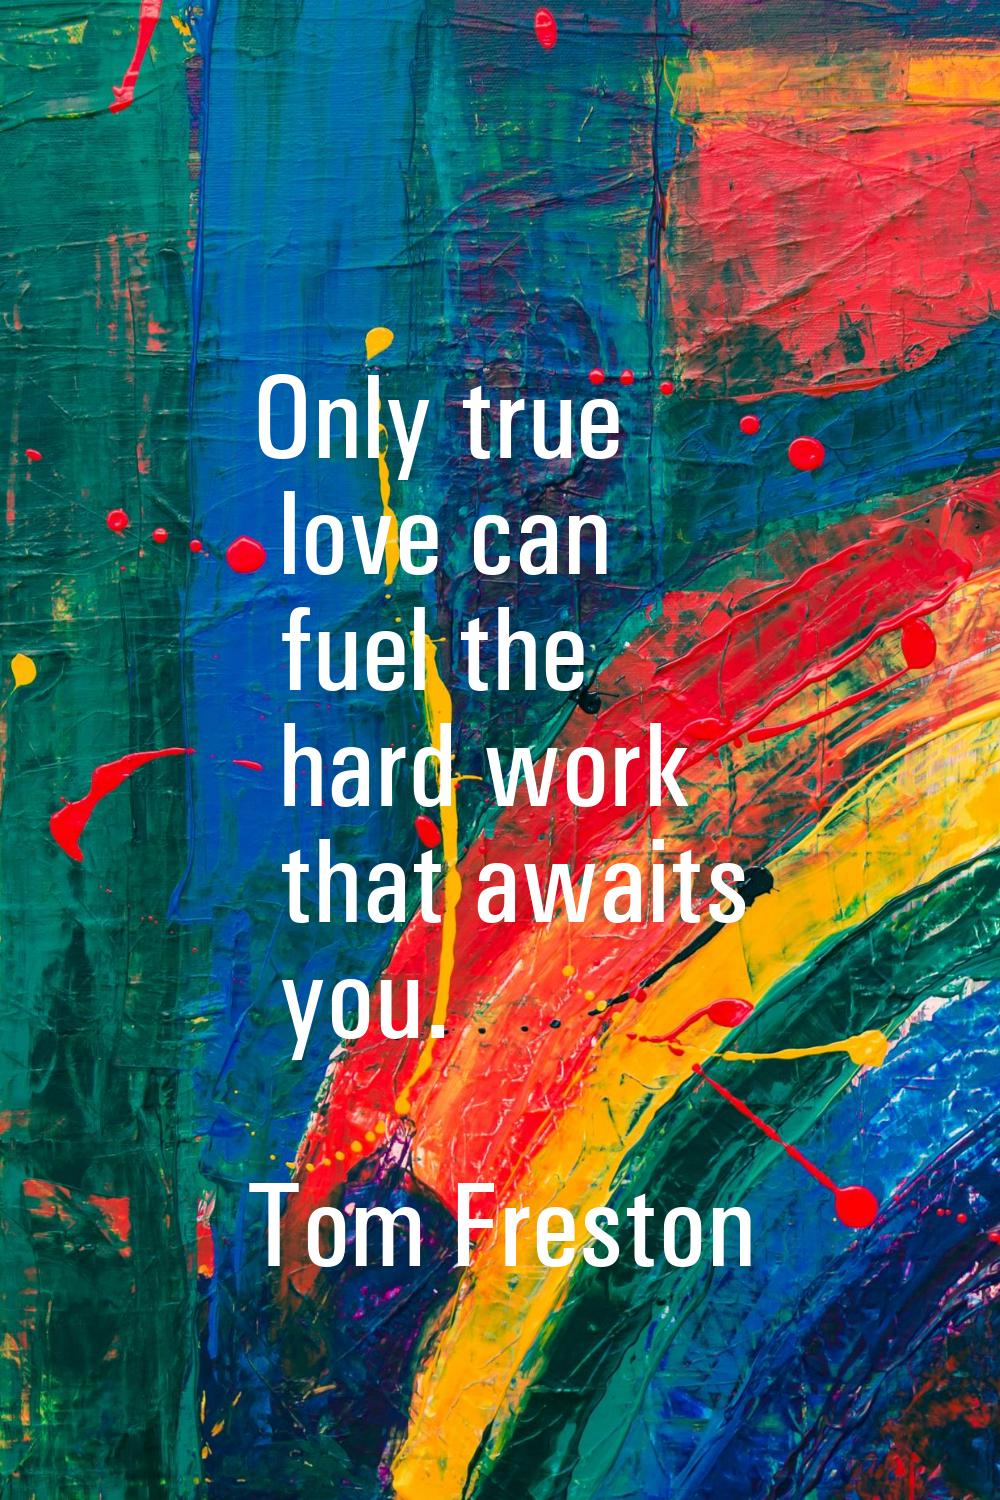 Only true love can fuel the hard work that awaits you.